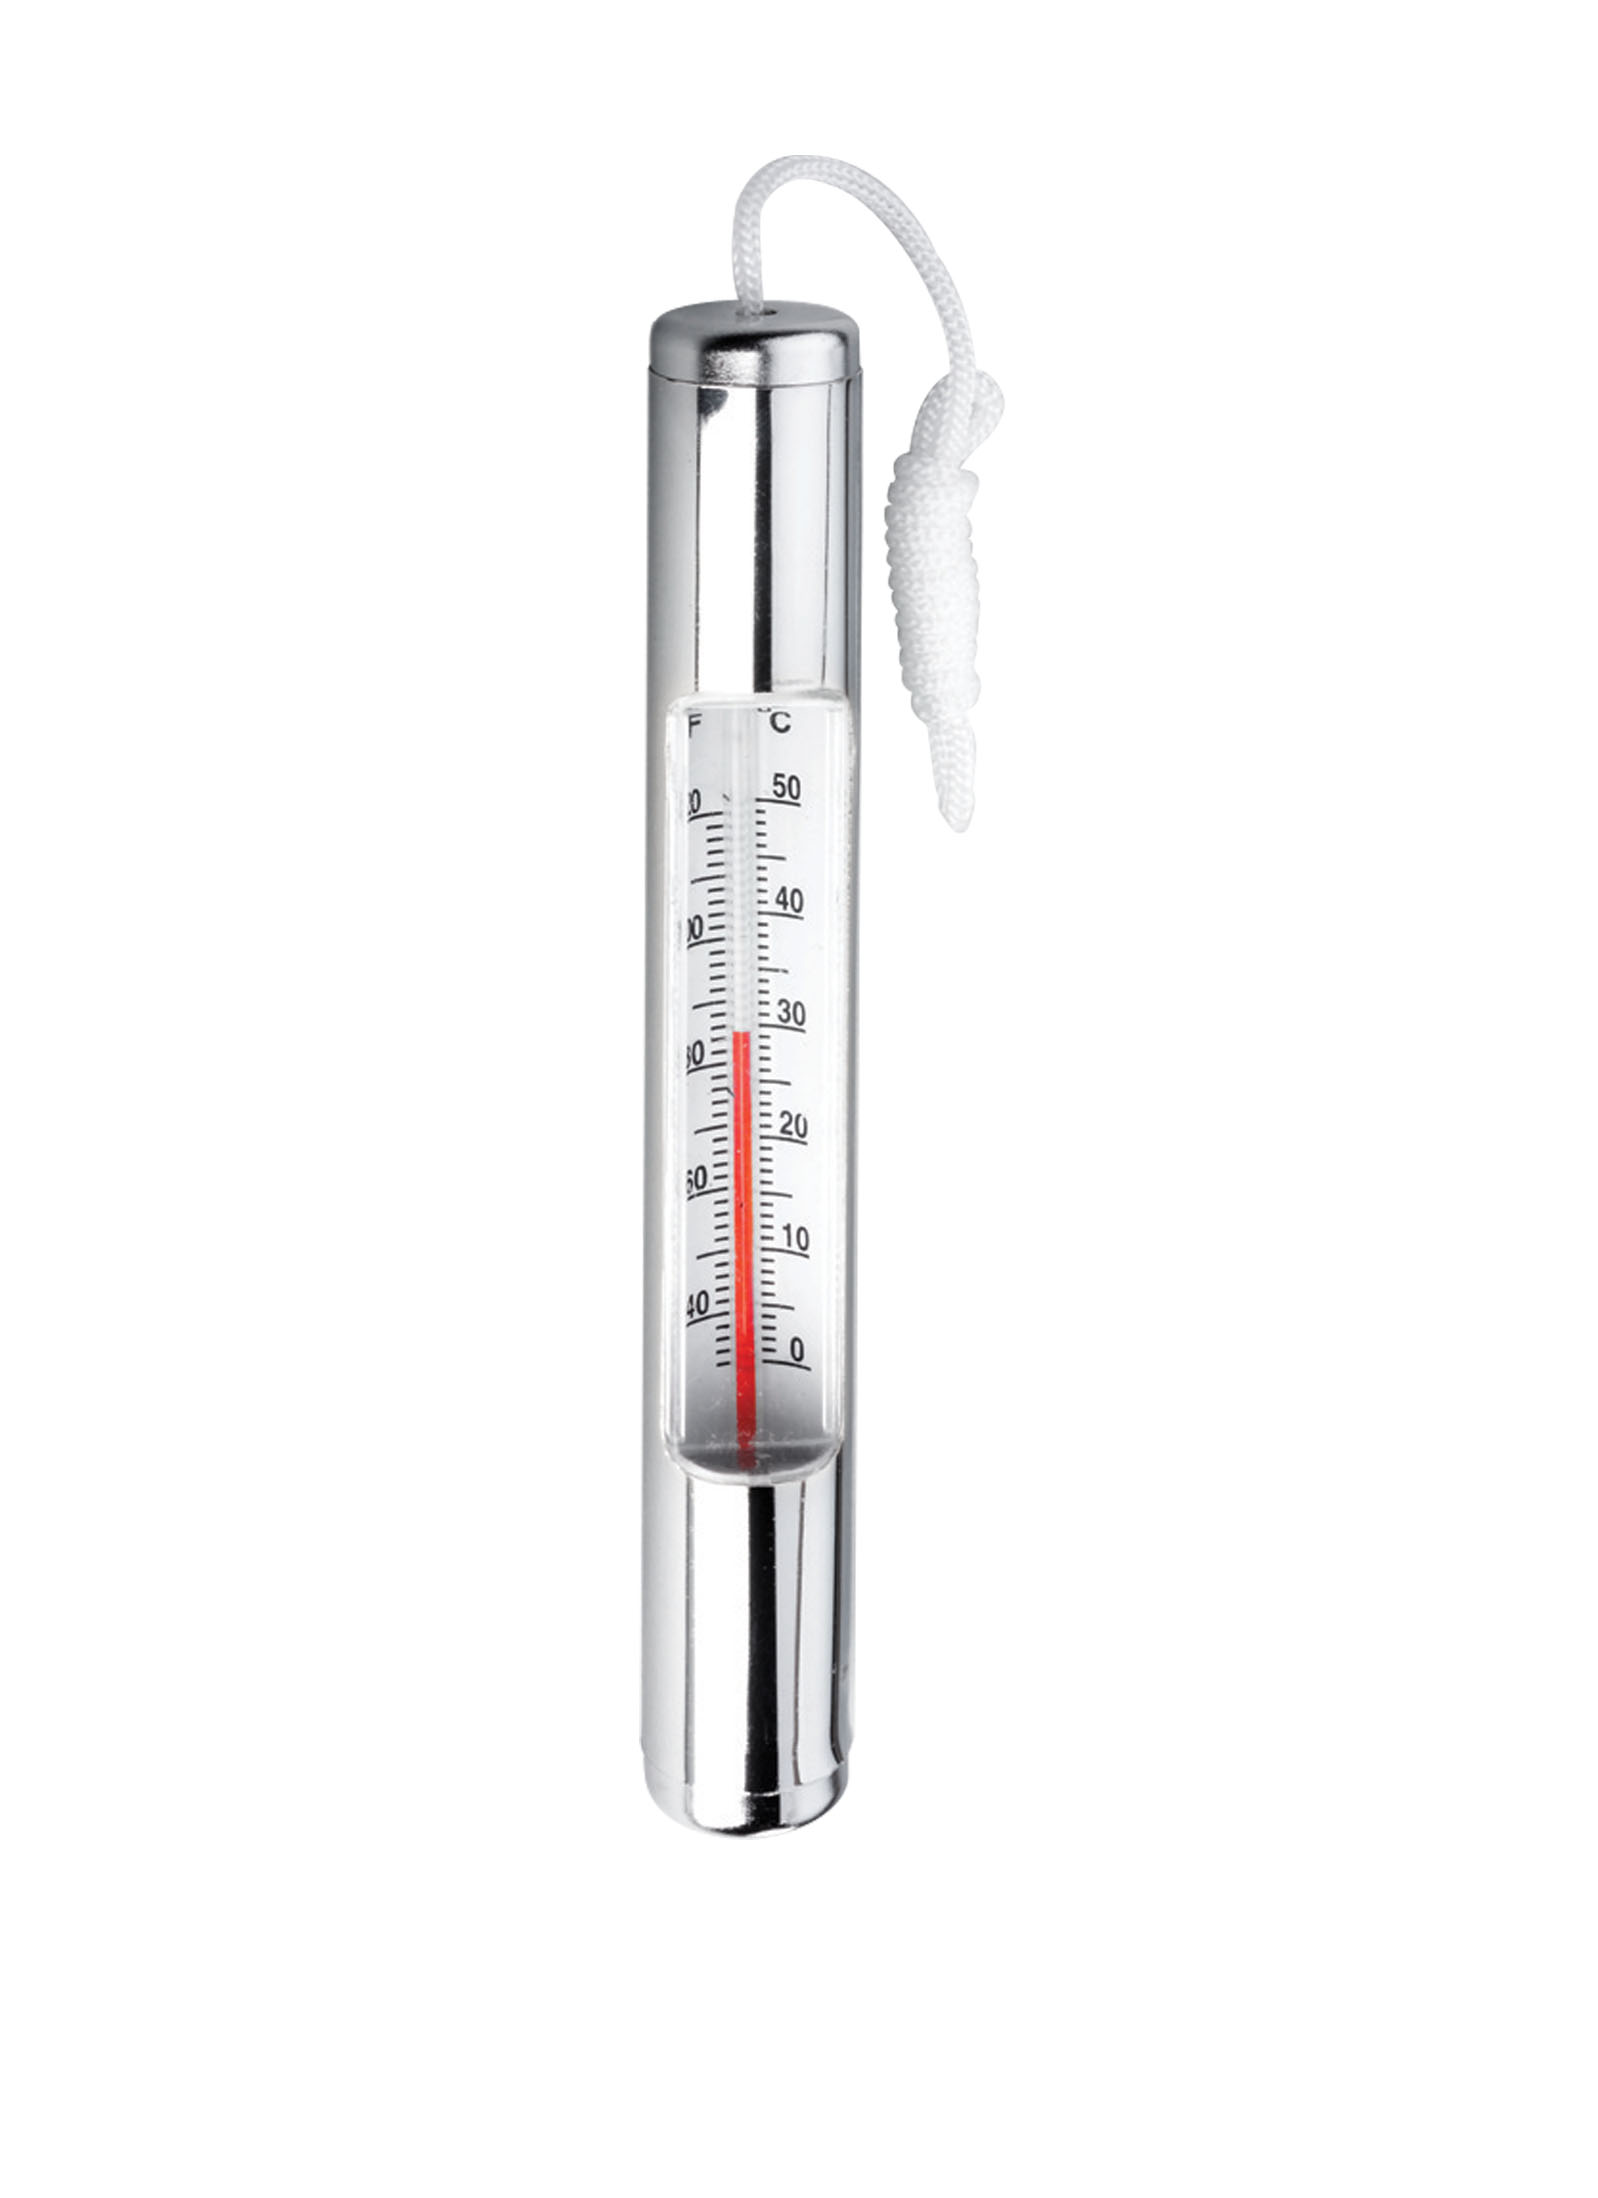 Thermometer Chrome Plated 150025PT - ELEMENTS